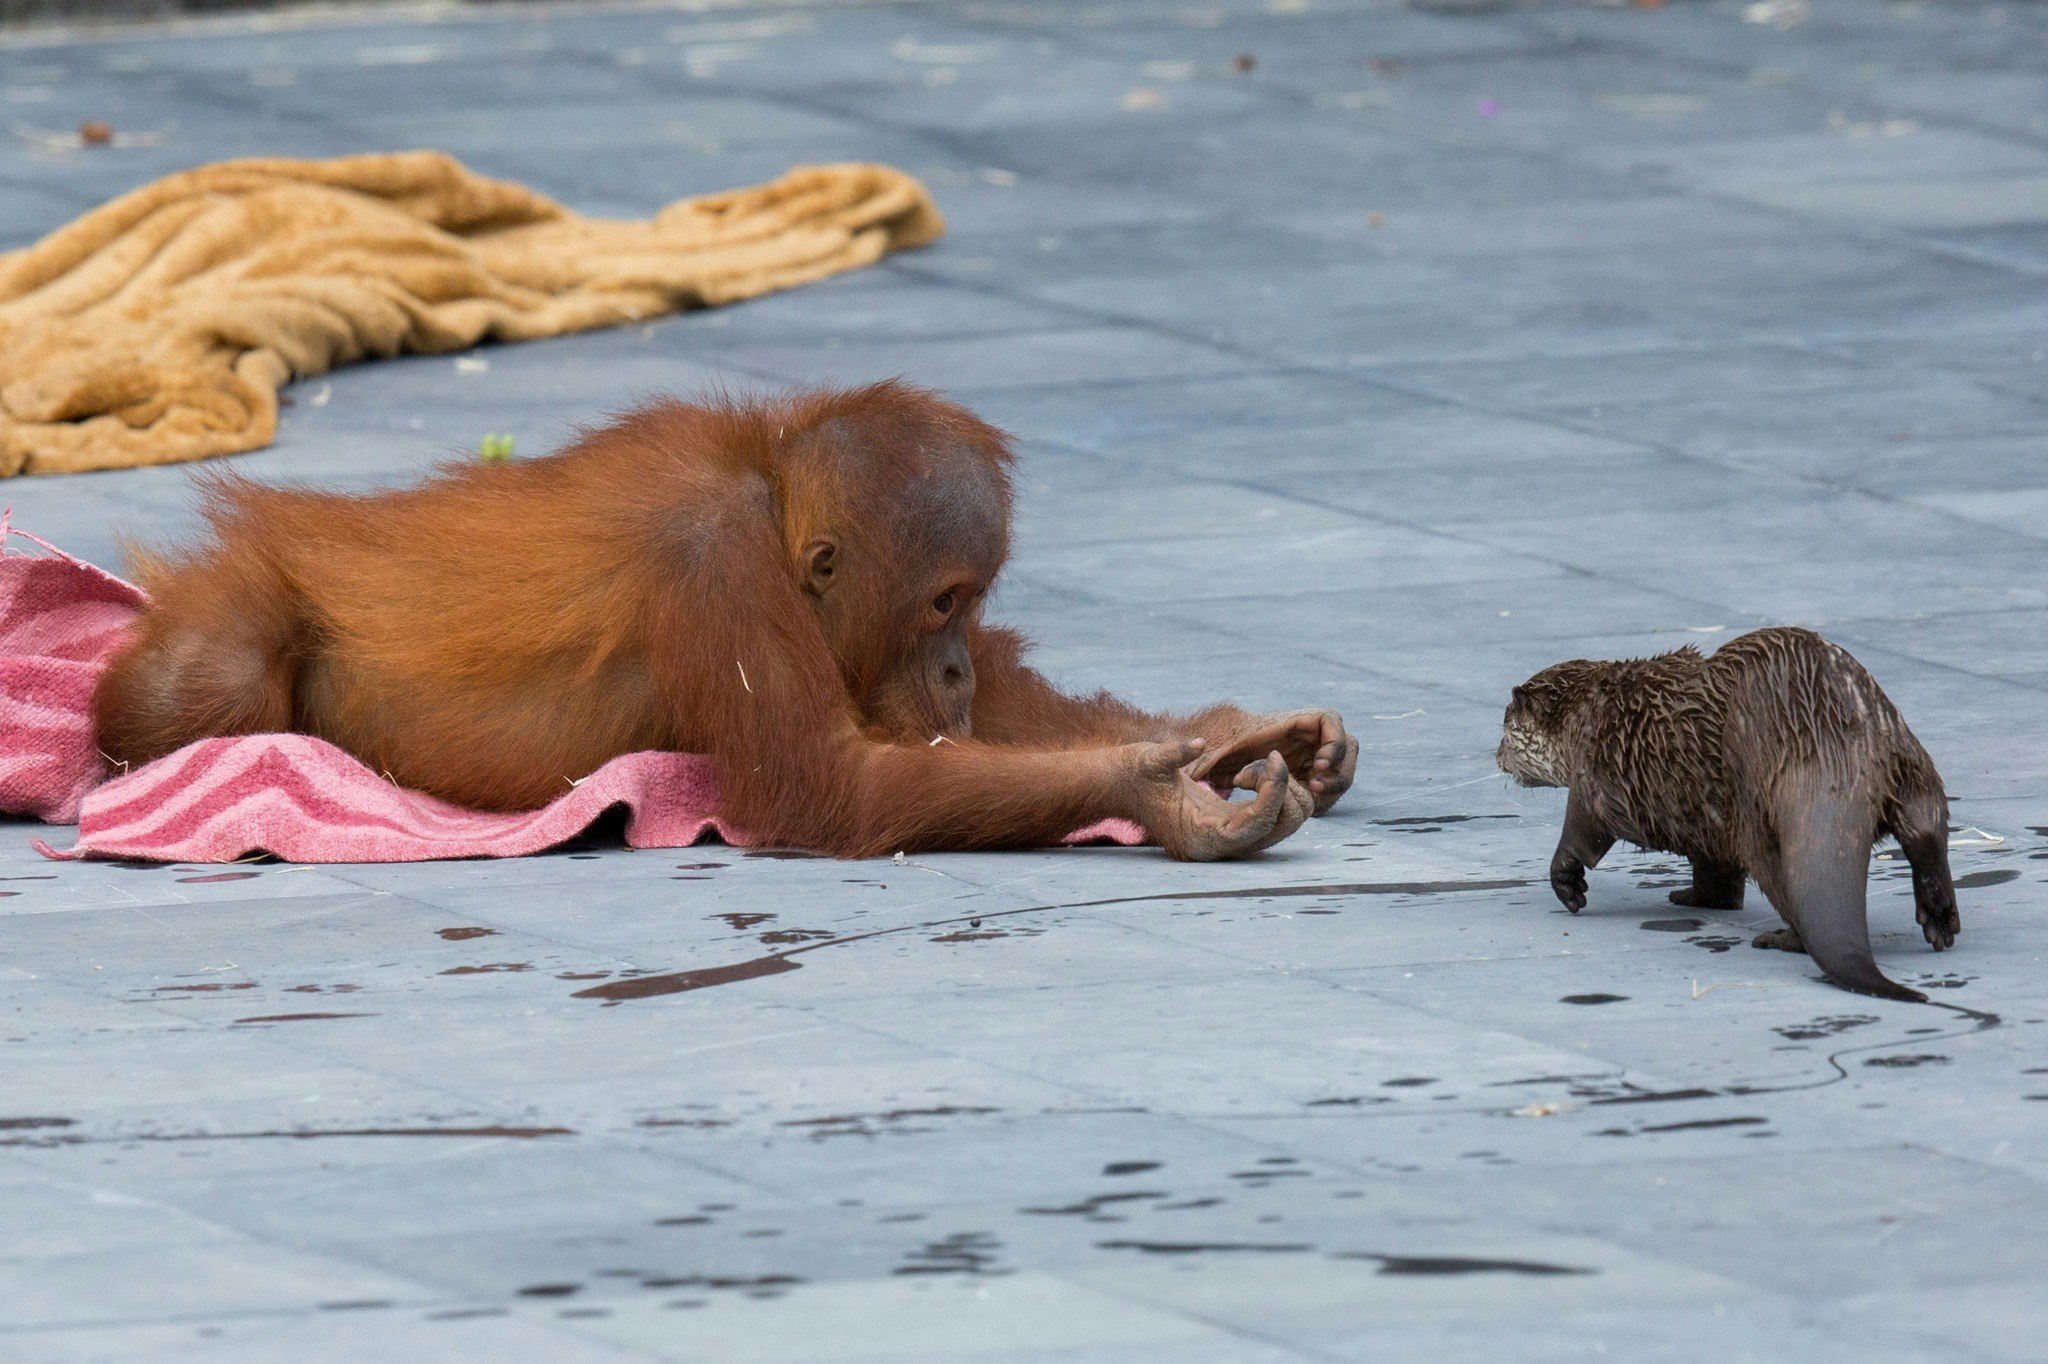 A baby orangutan lays on the ground with both arms outstretched to an otter (as if offering it something). 